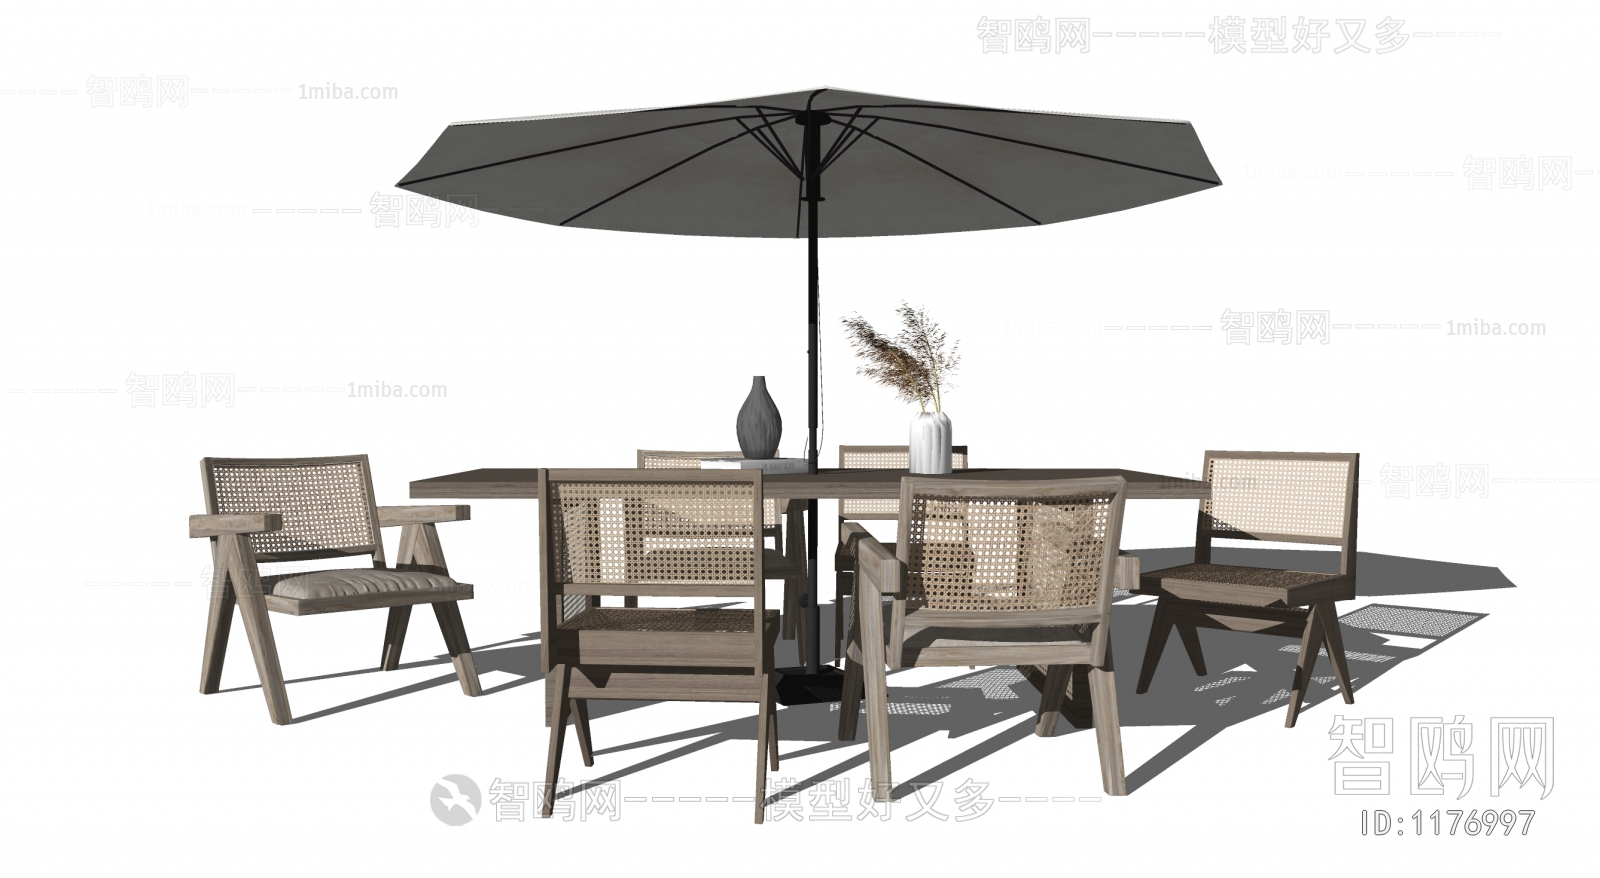 Wabi-sabi Style Outdoor Tables And Chairs